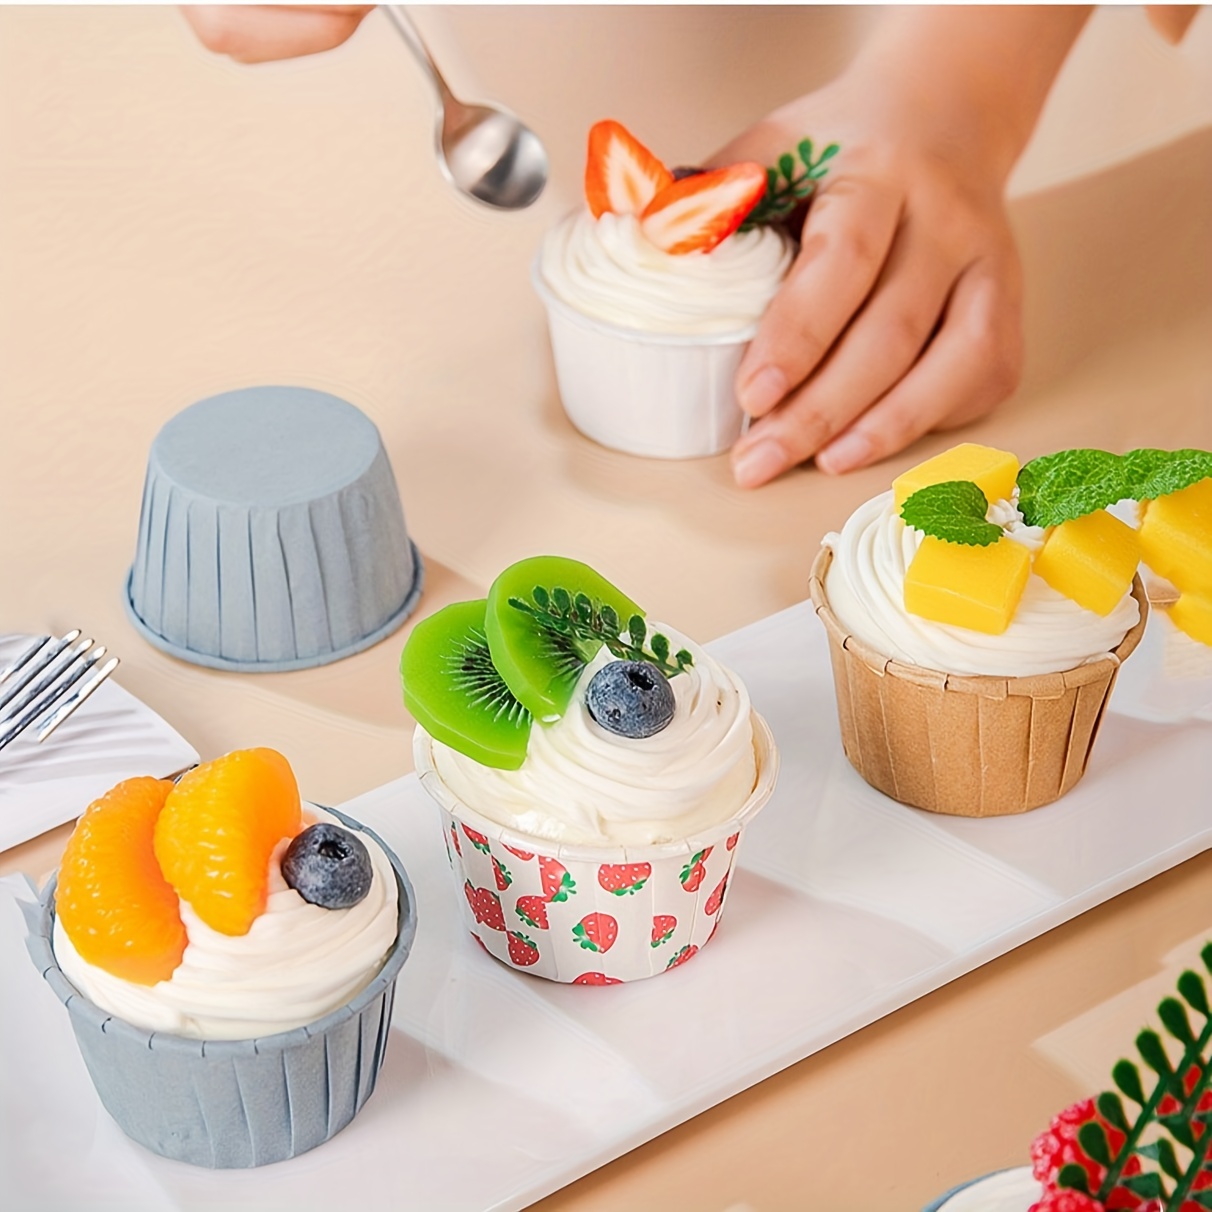 100pcs Paper Cupcake Cup 2.5oz Standard Muffin Baking Cups Liners Cupcakes  Case